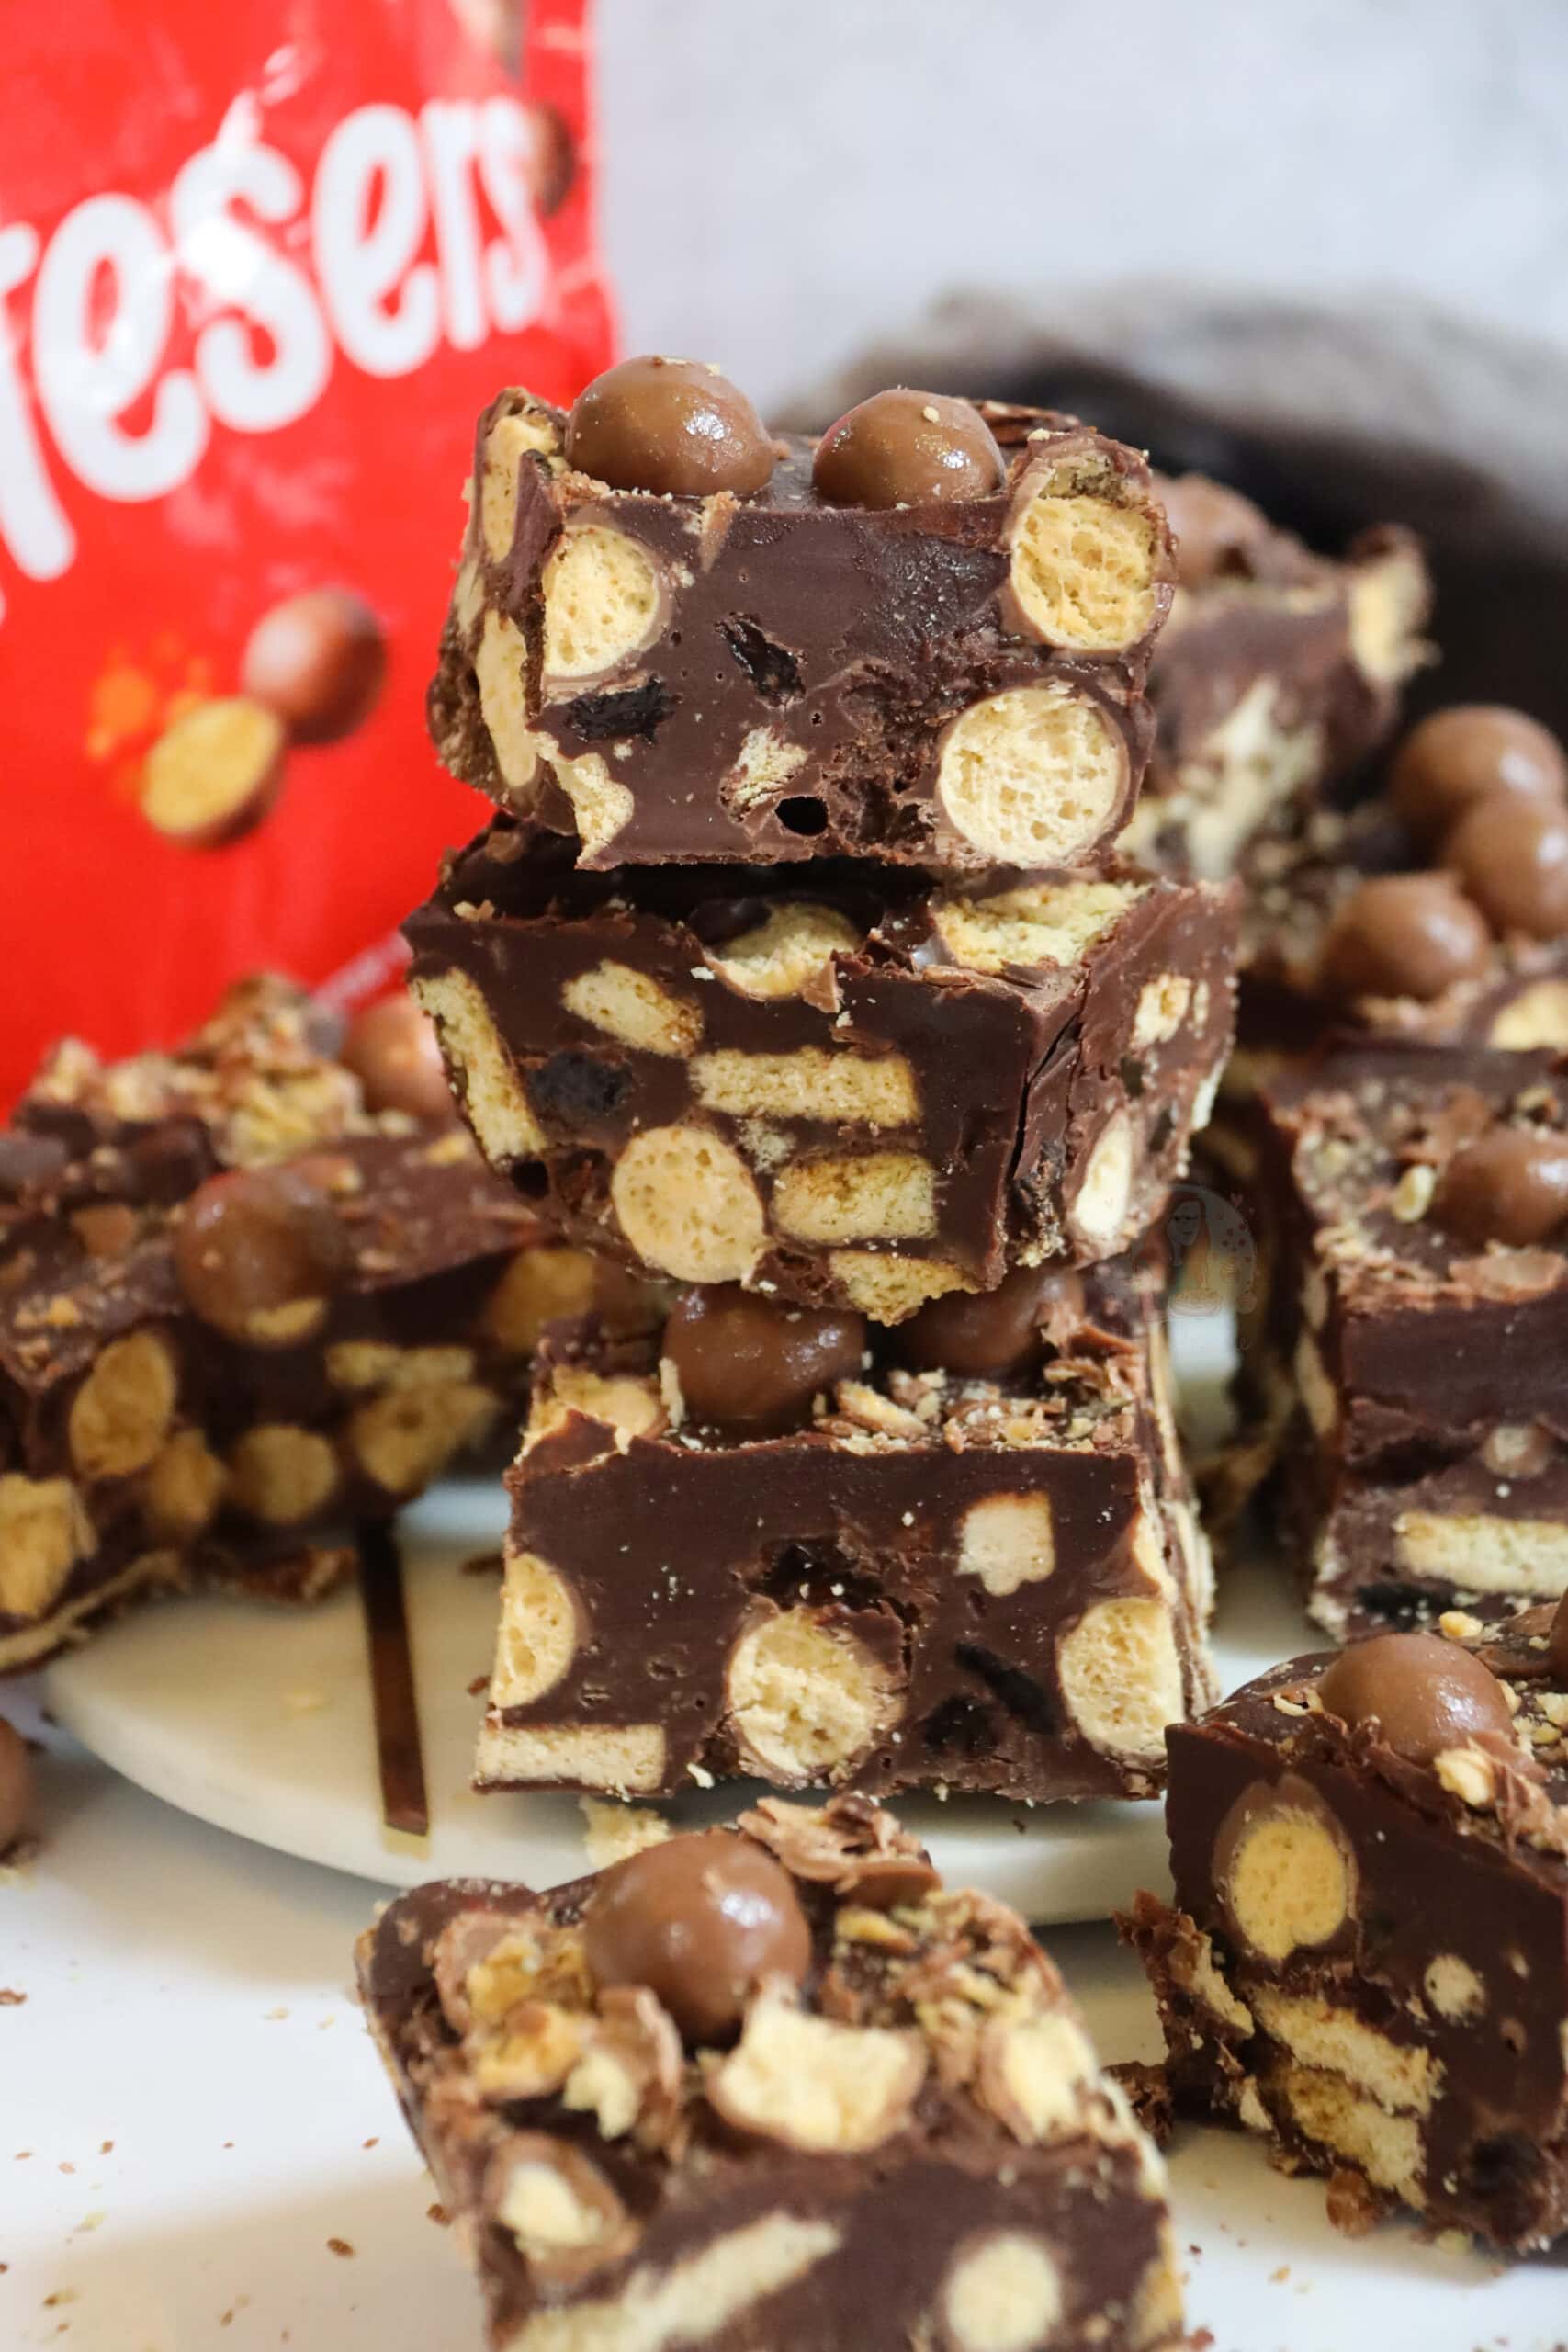 Tesco is selling chocolate traybake topped with M&Ms, Maltesers